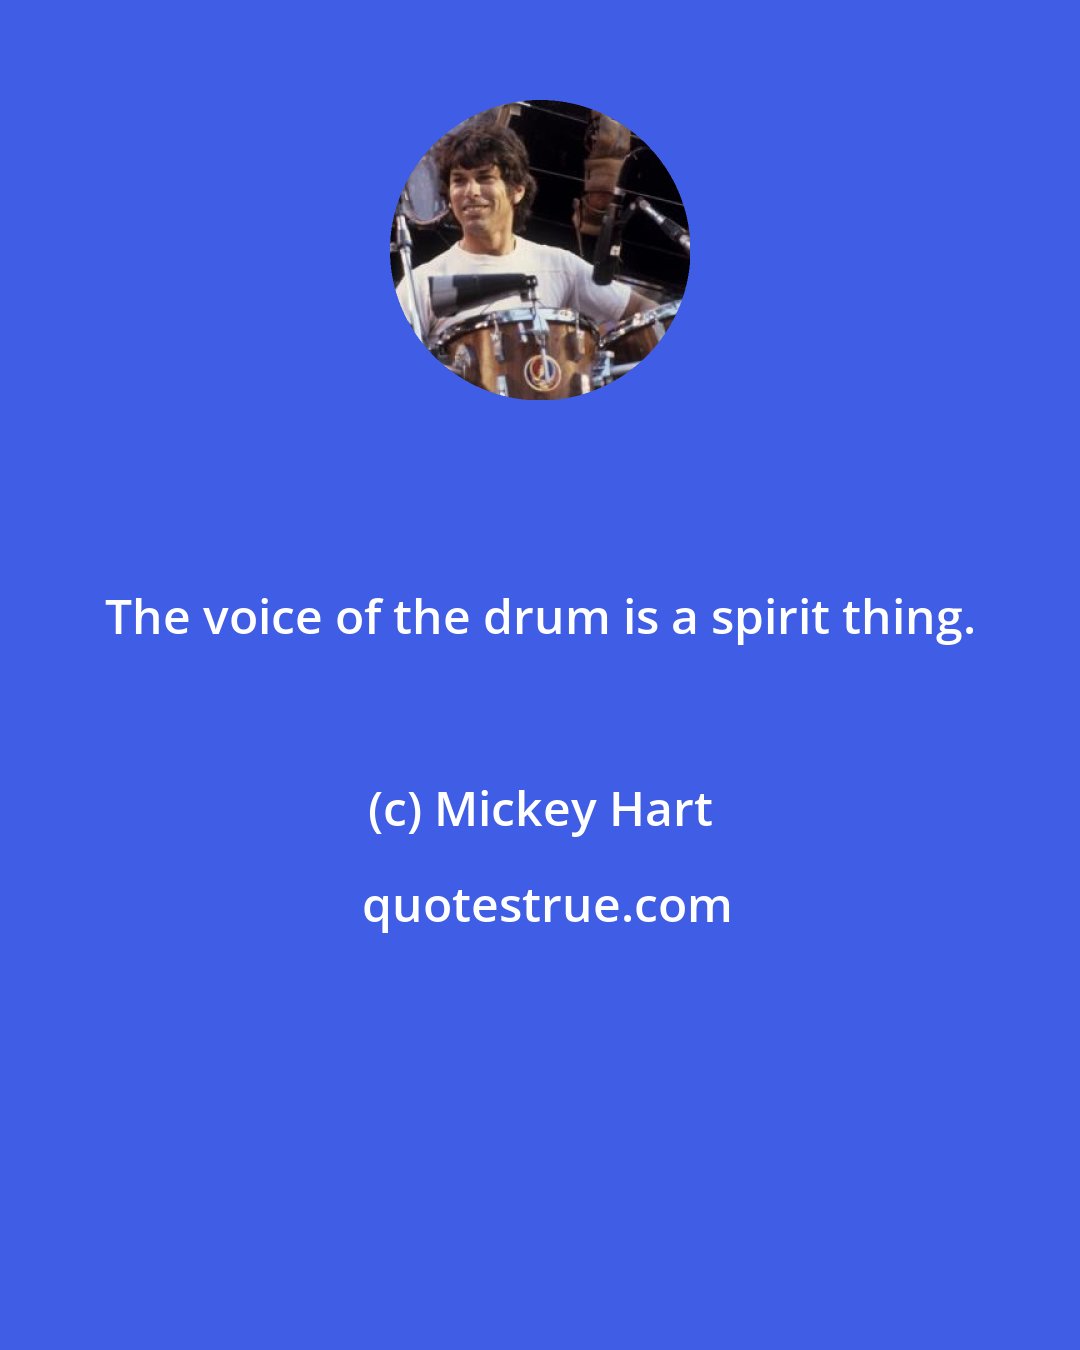 Mickey Hart: The voice of the drum is a spirit thing.